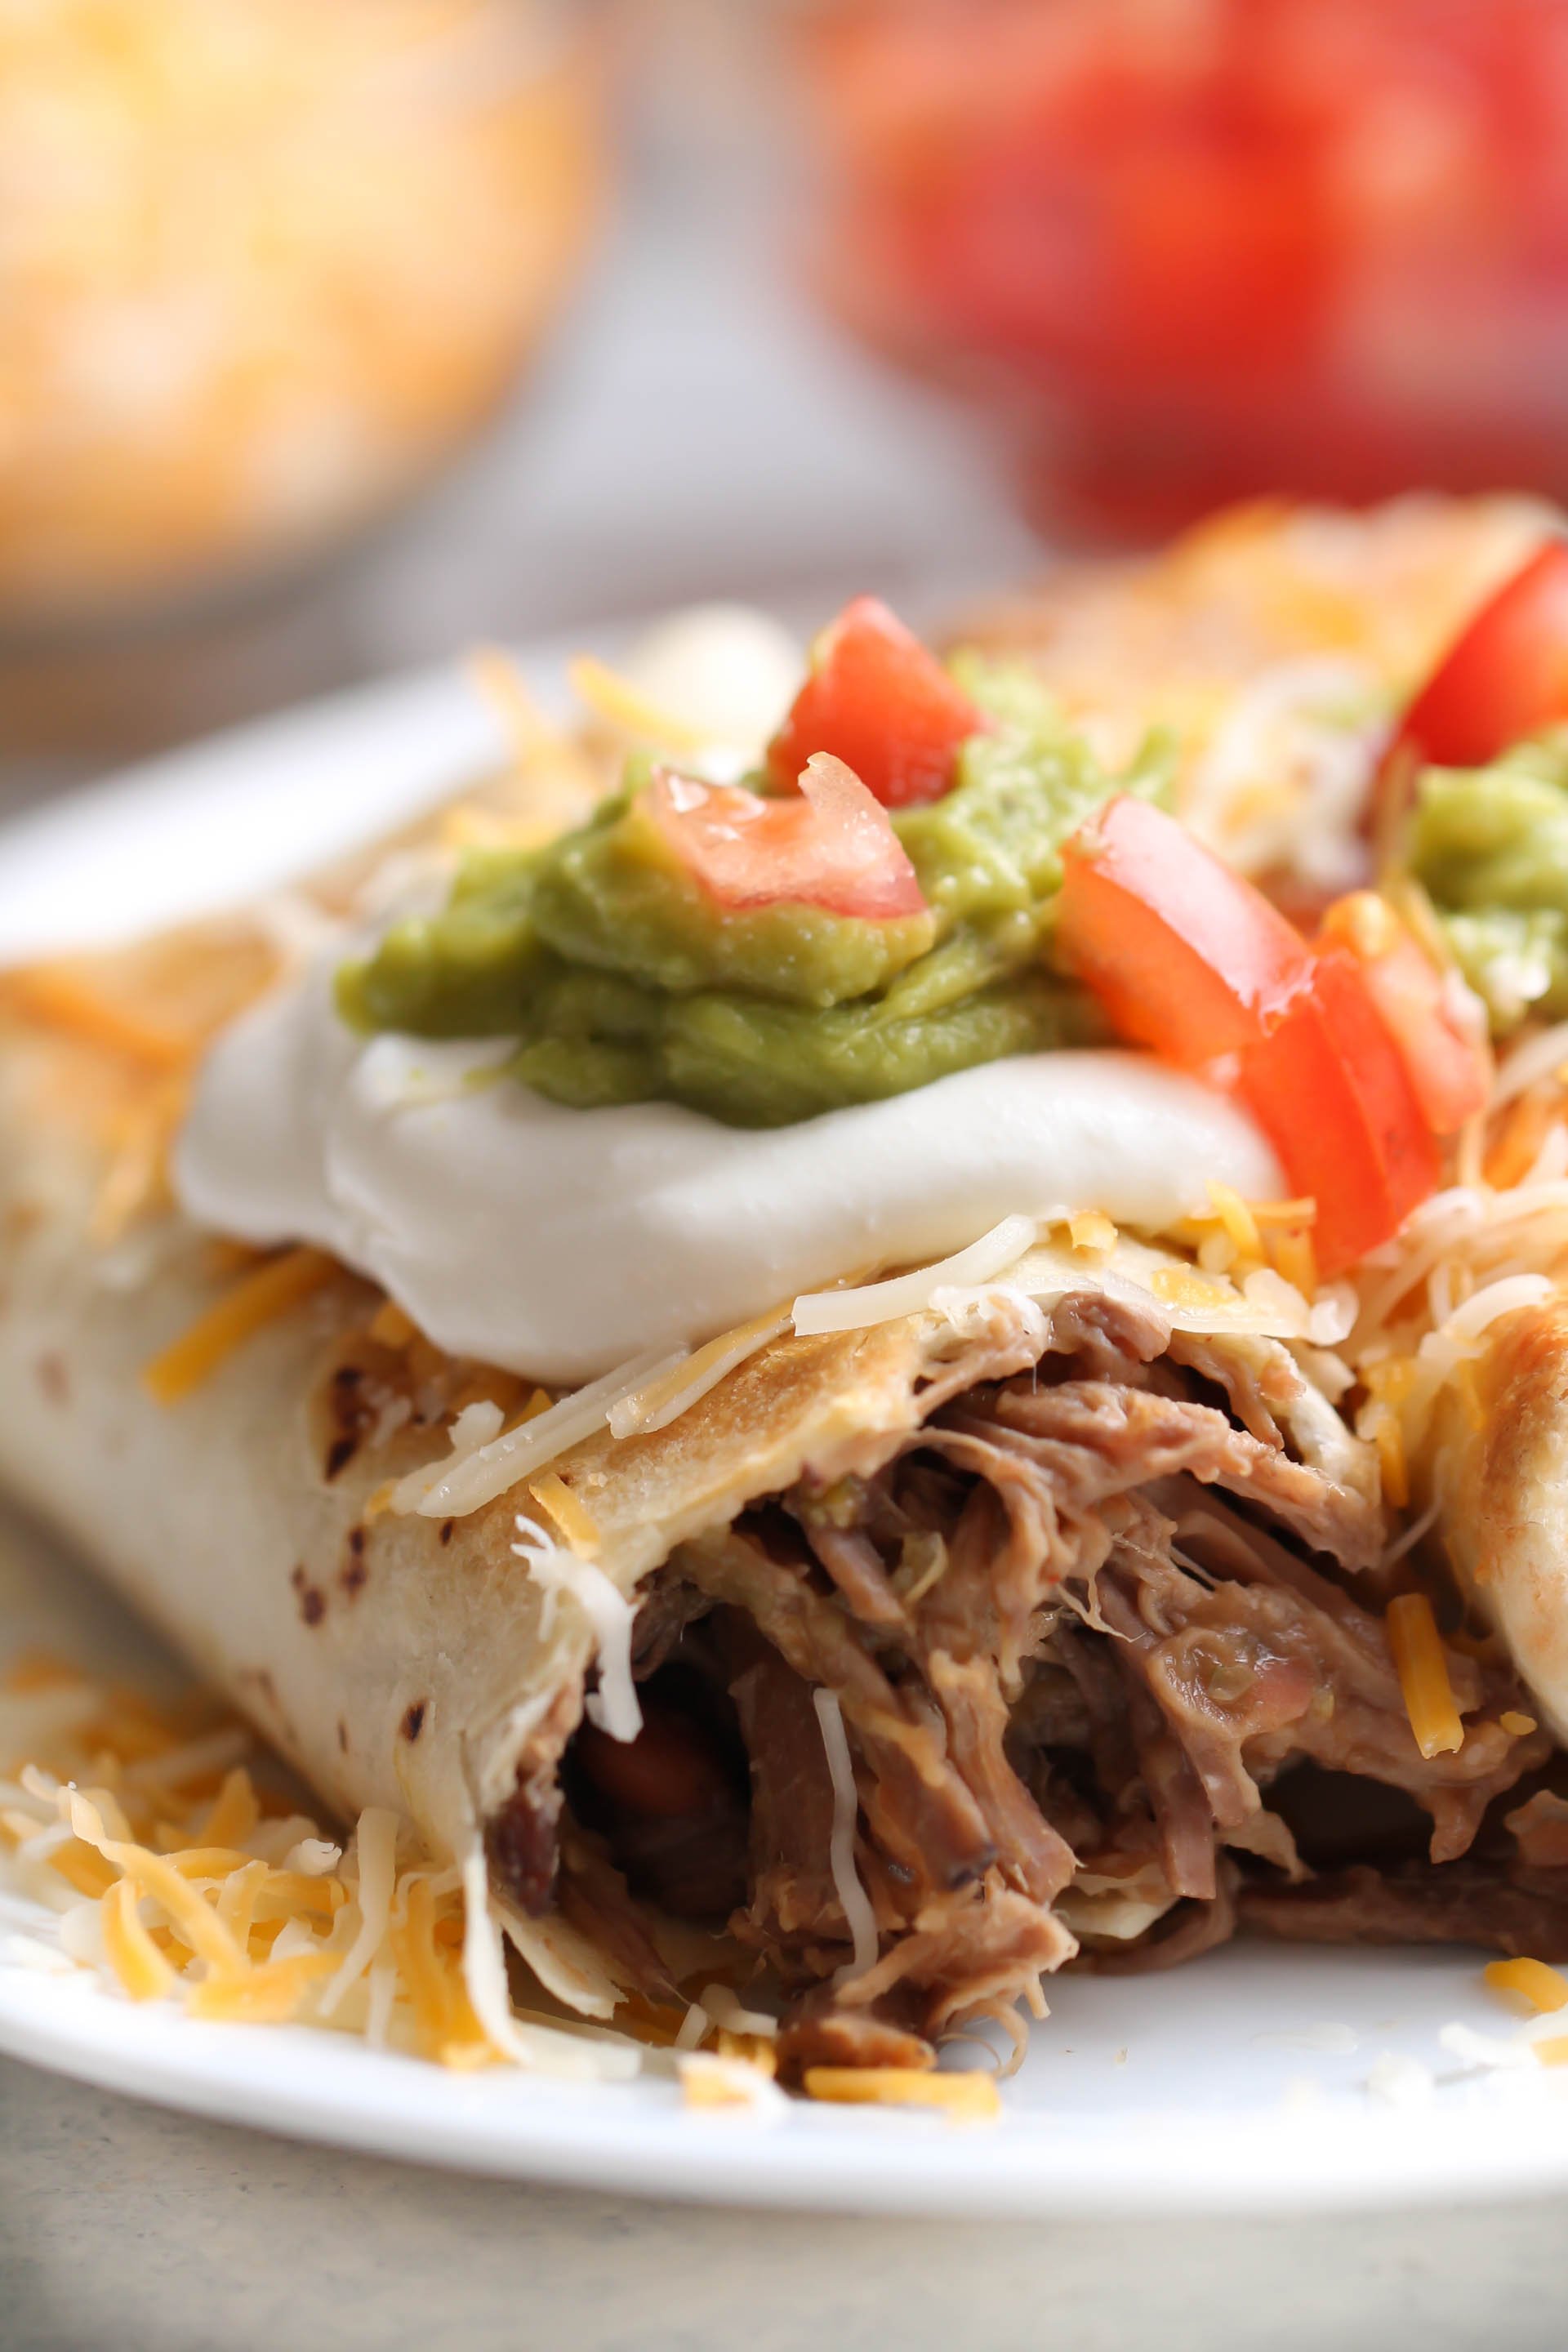 Healthy Baked Shredded Beef Chimichangas Recipe